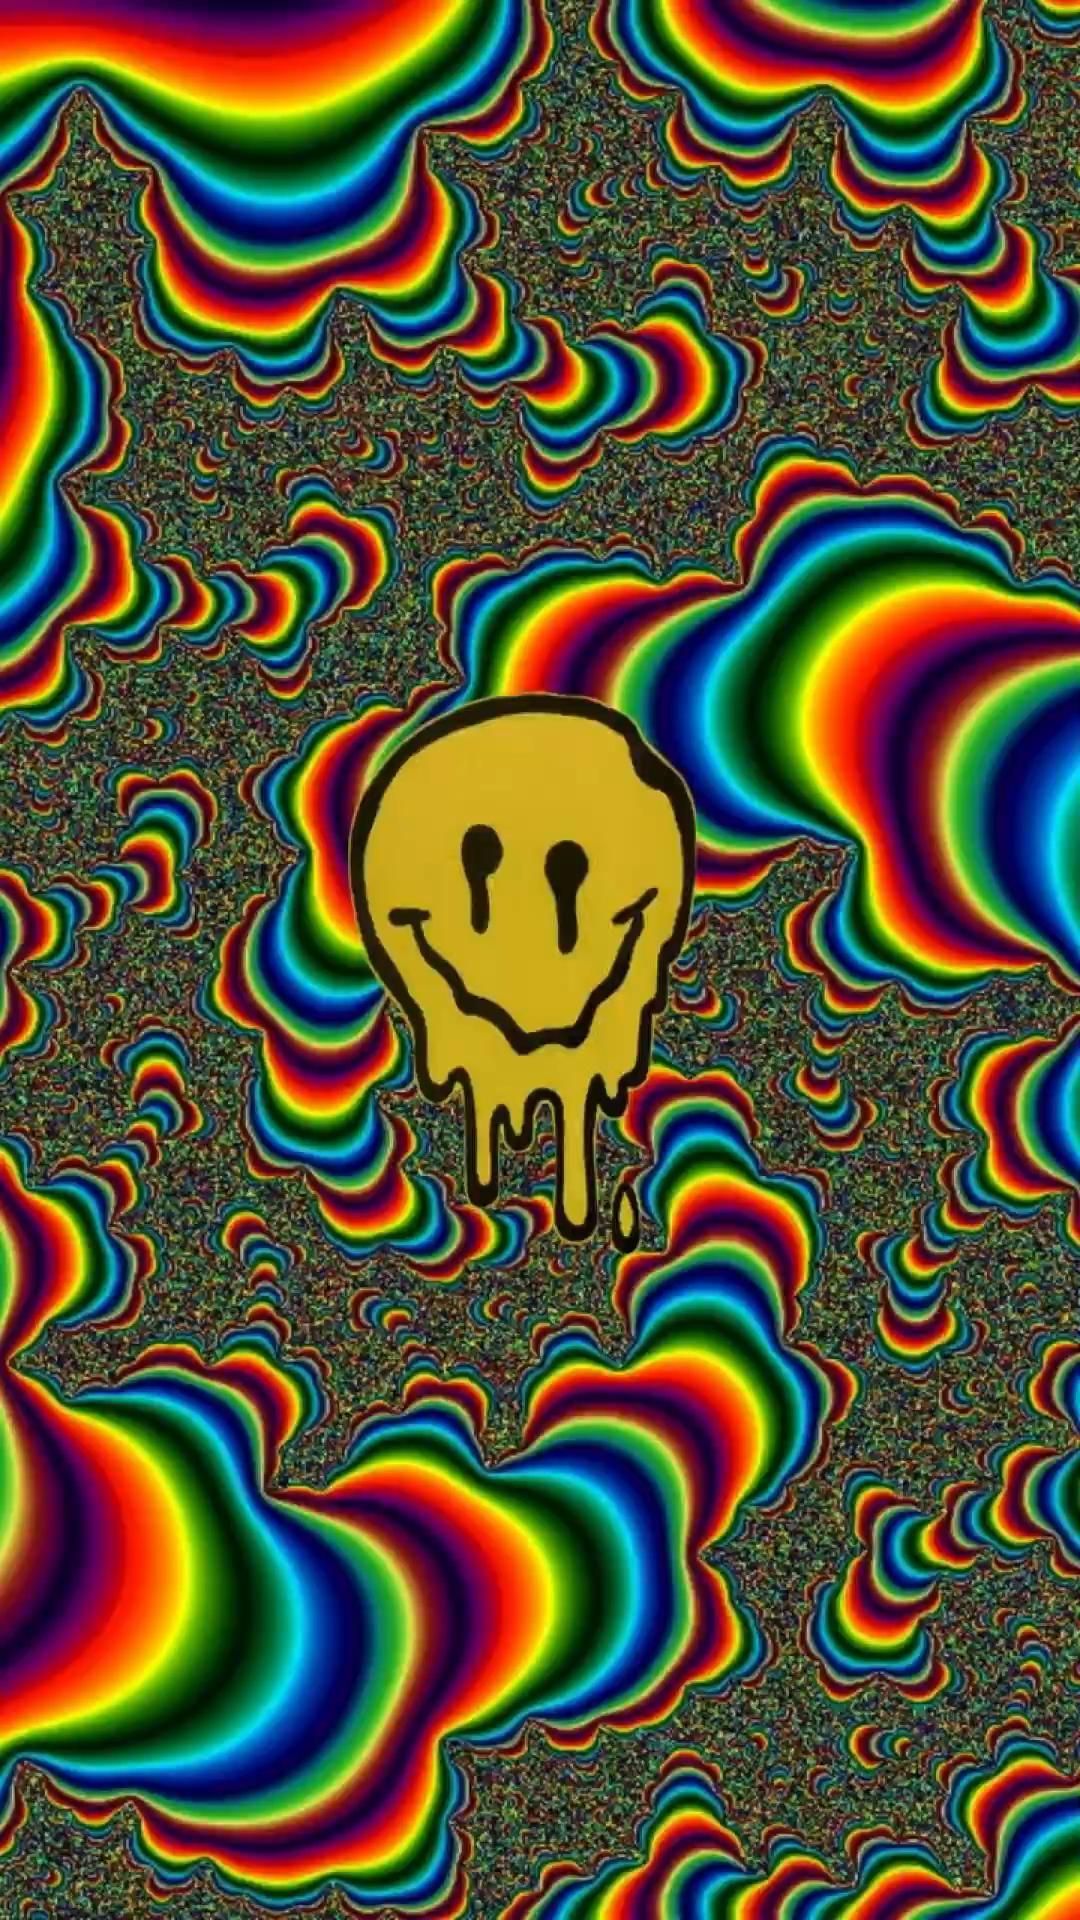 A colorful background with rainbow waves and an image of the face - Trippy